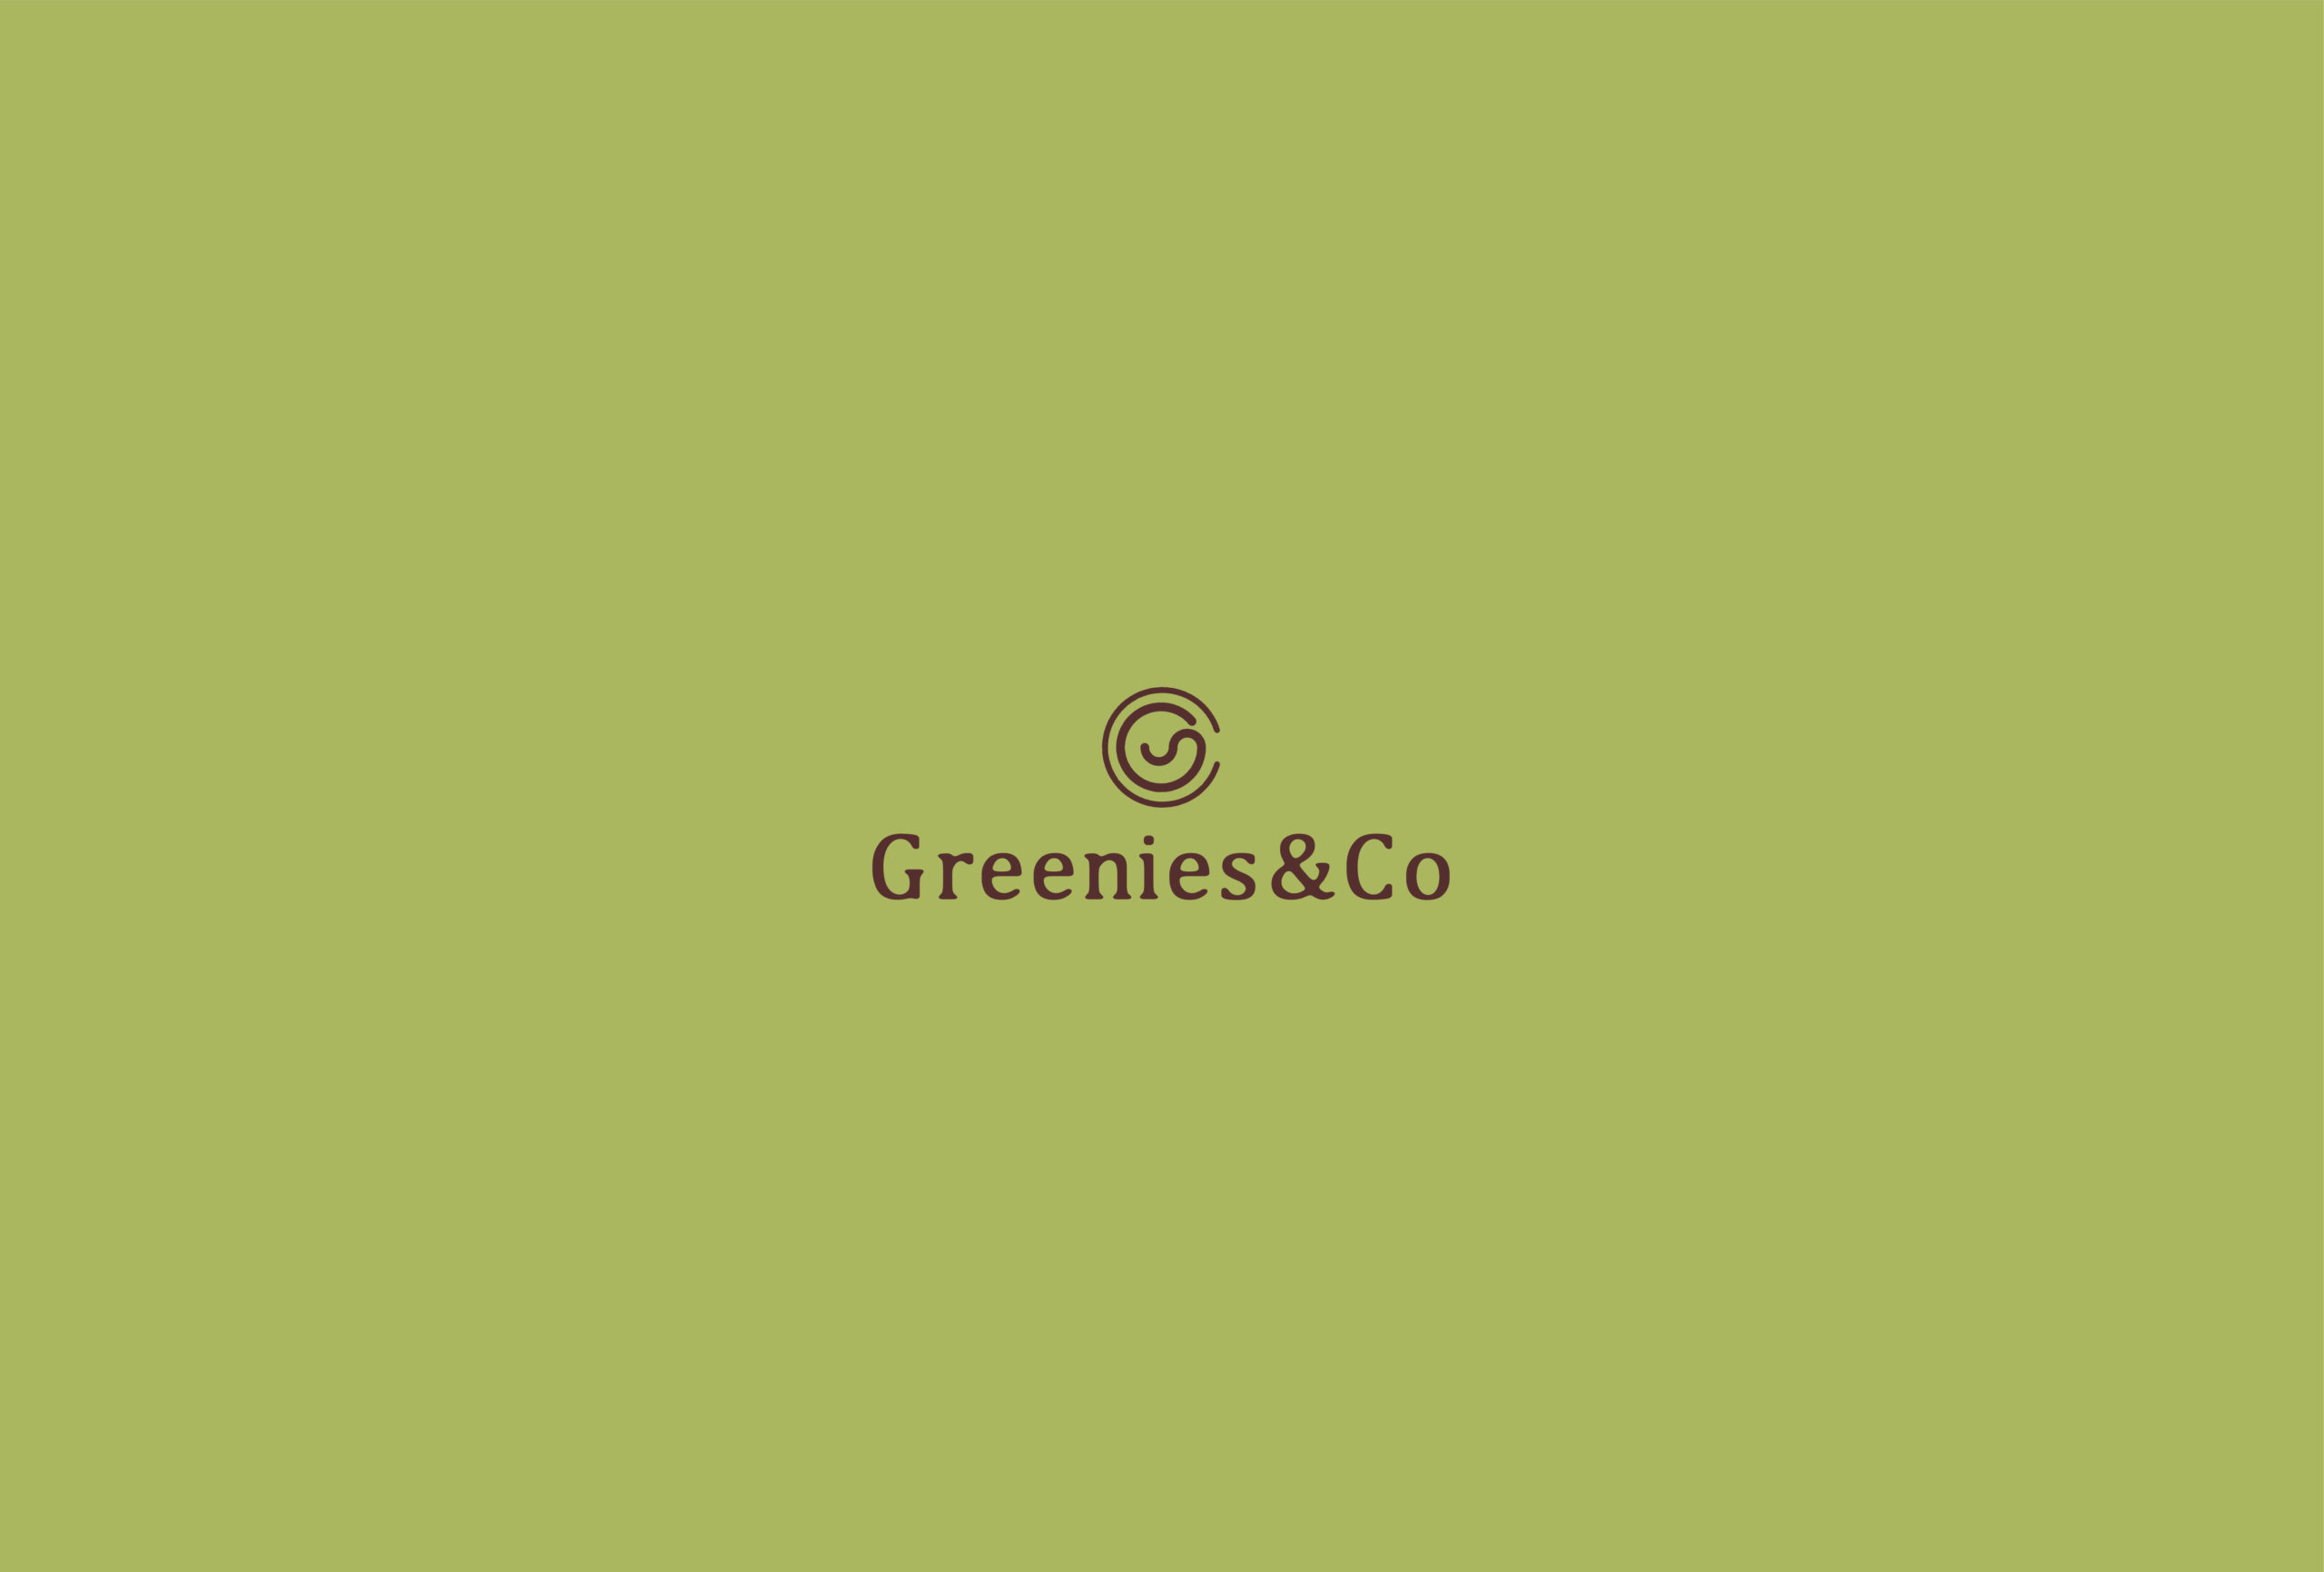 Greenies and co – for web-02